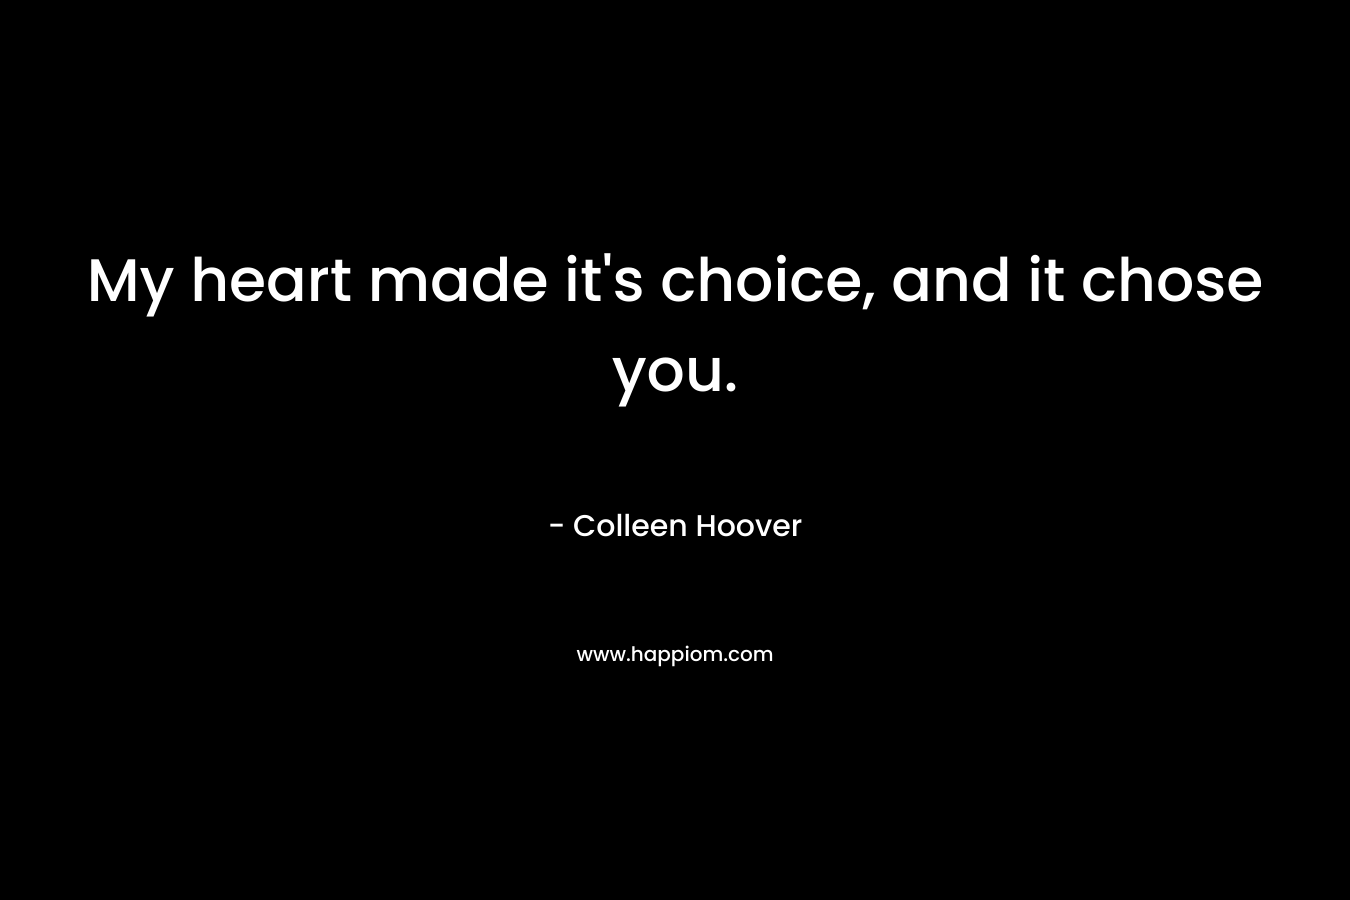 My heart made it's choice, and it chose you.